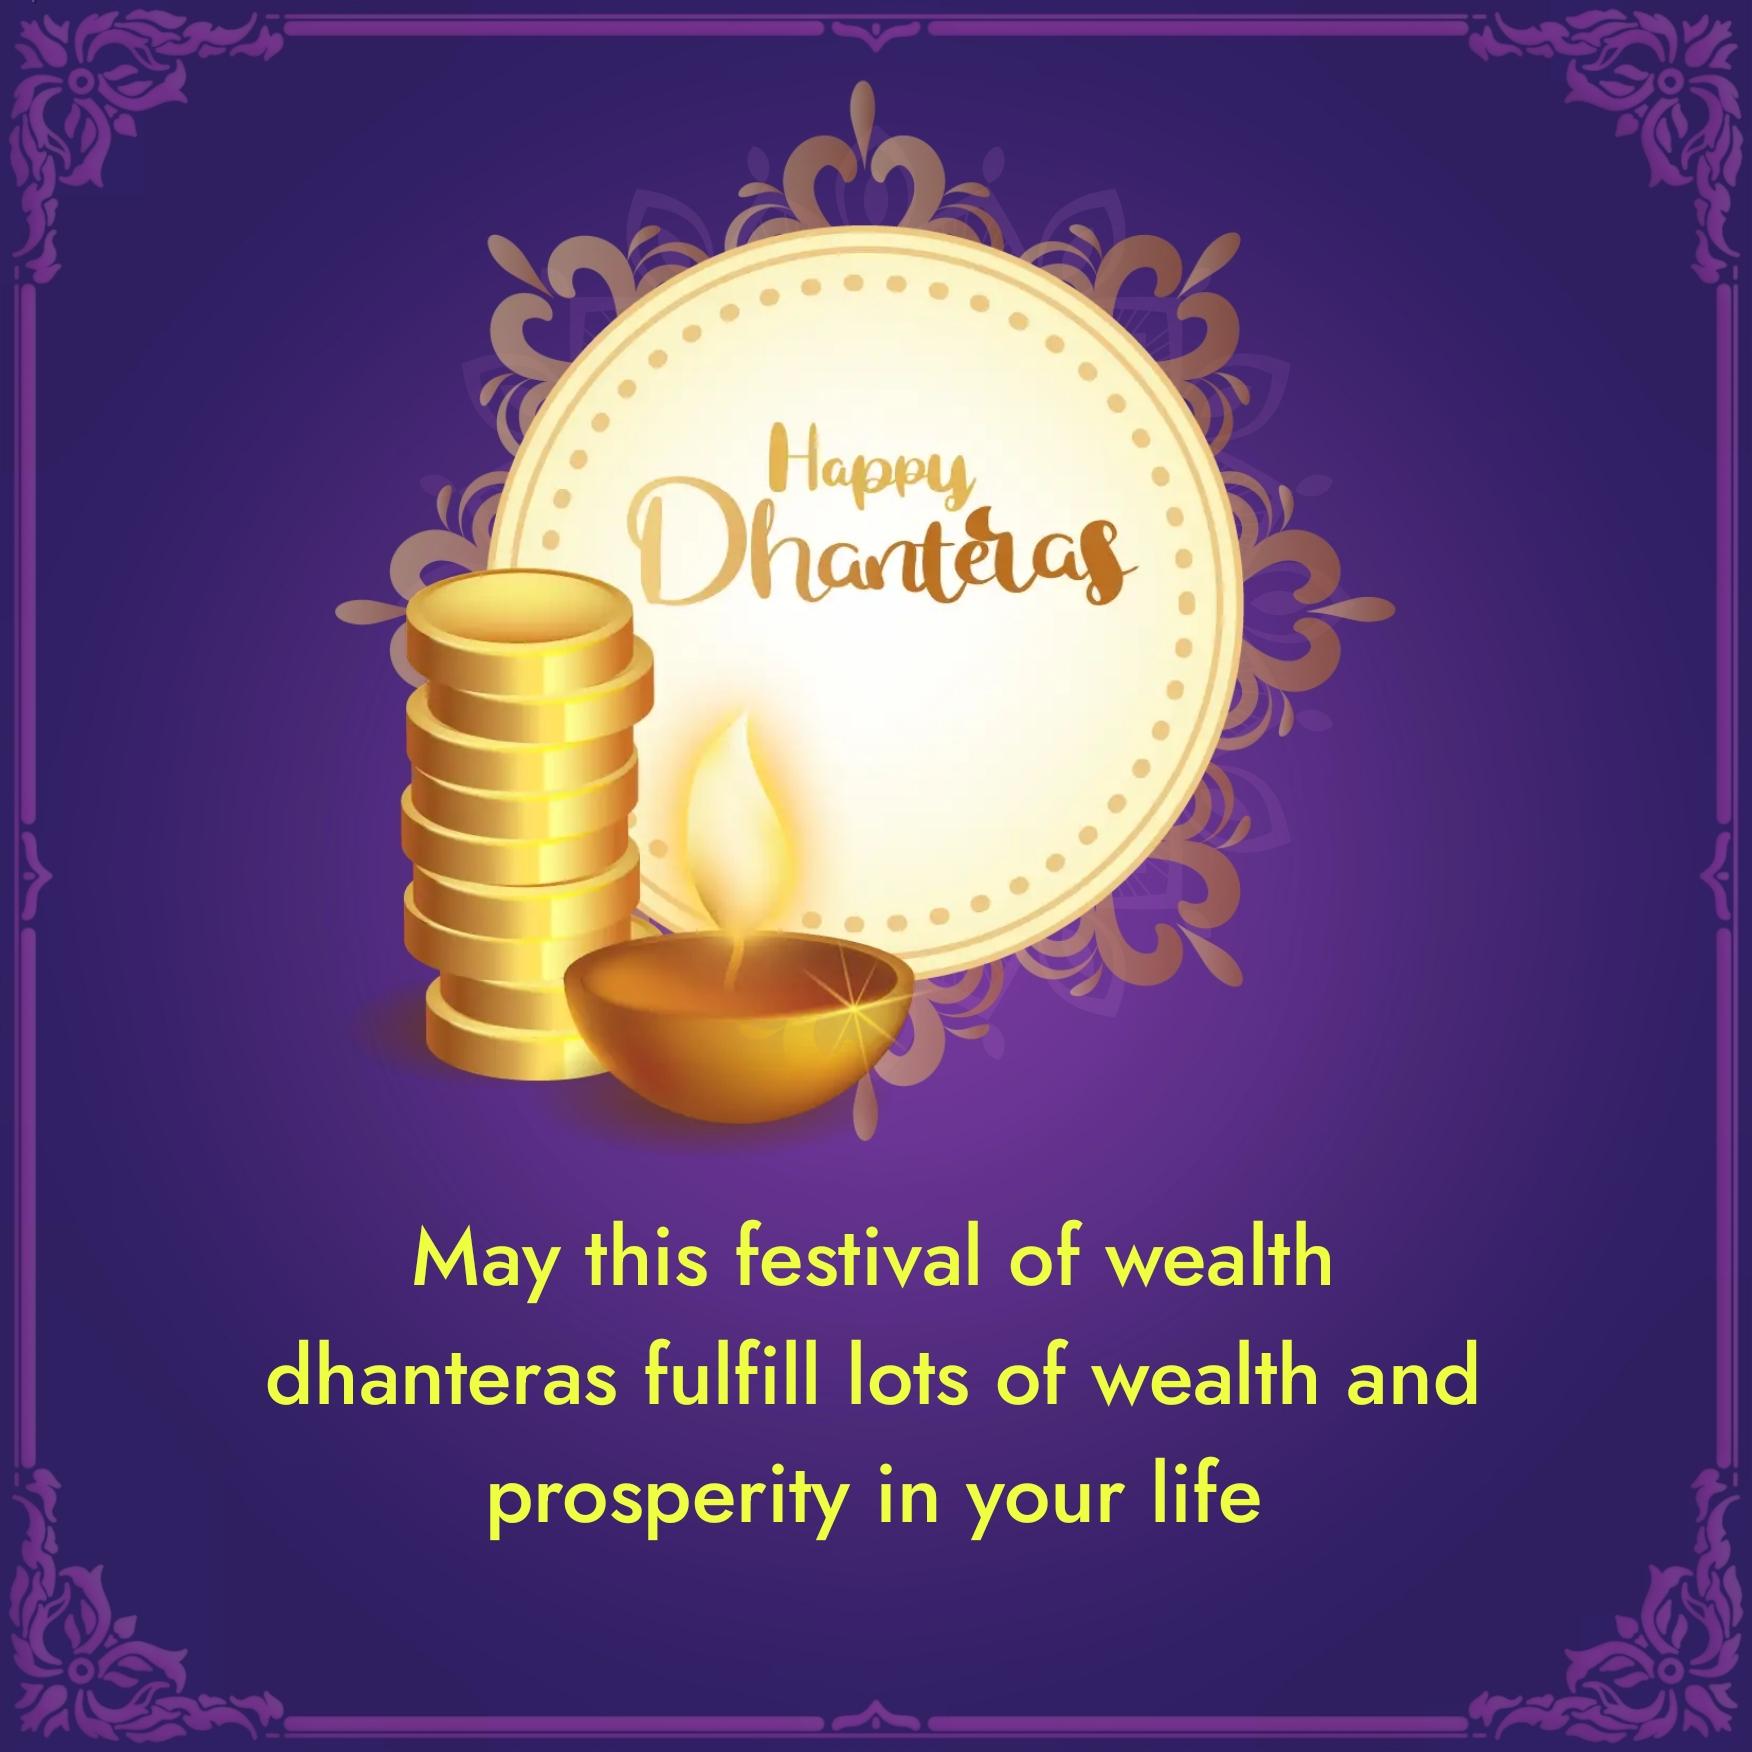 May this festival of wealth dhanteras fulfill lots of wealth